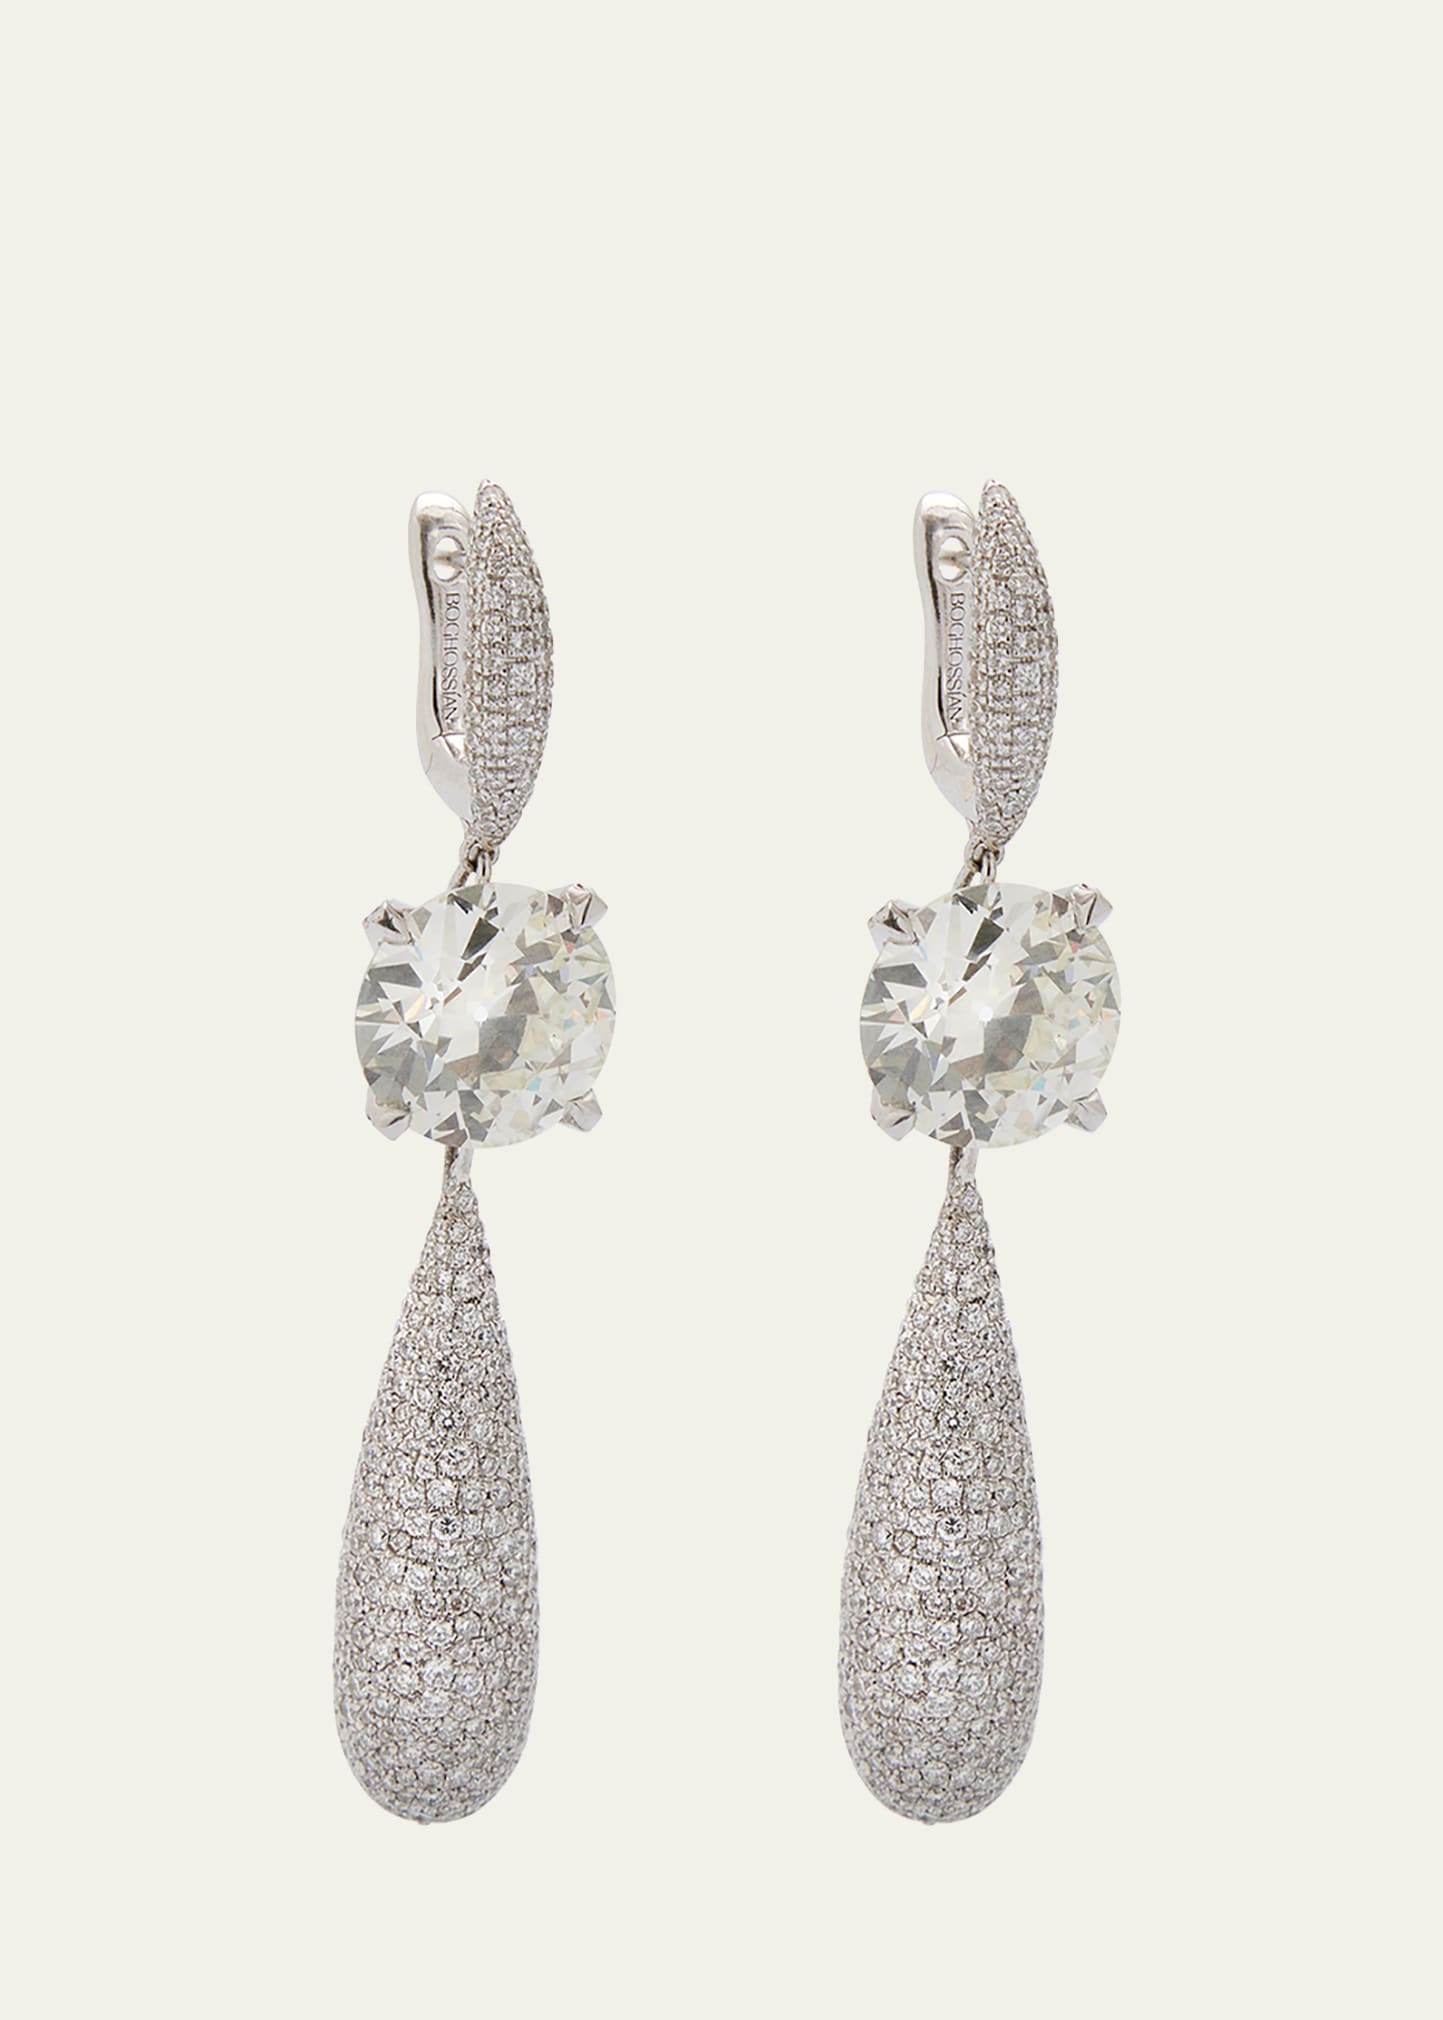 White Gold Detachable Earrings with Diamonds